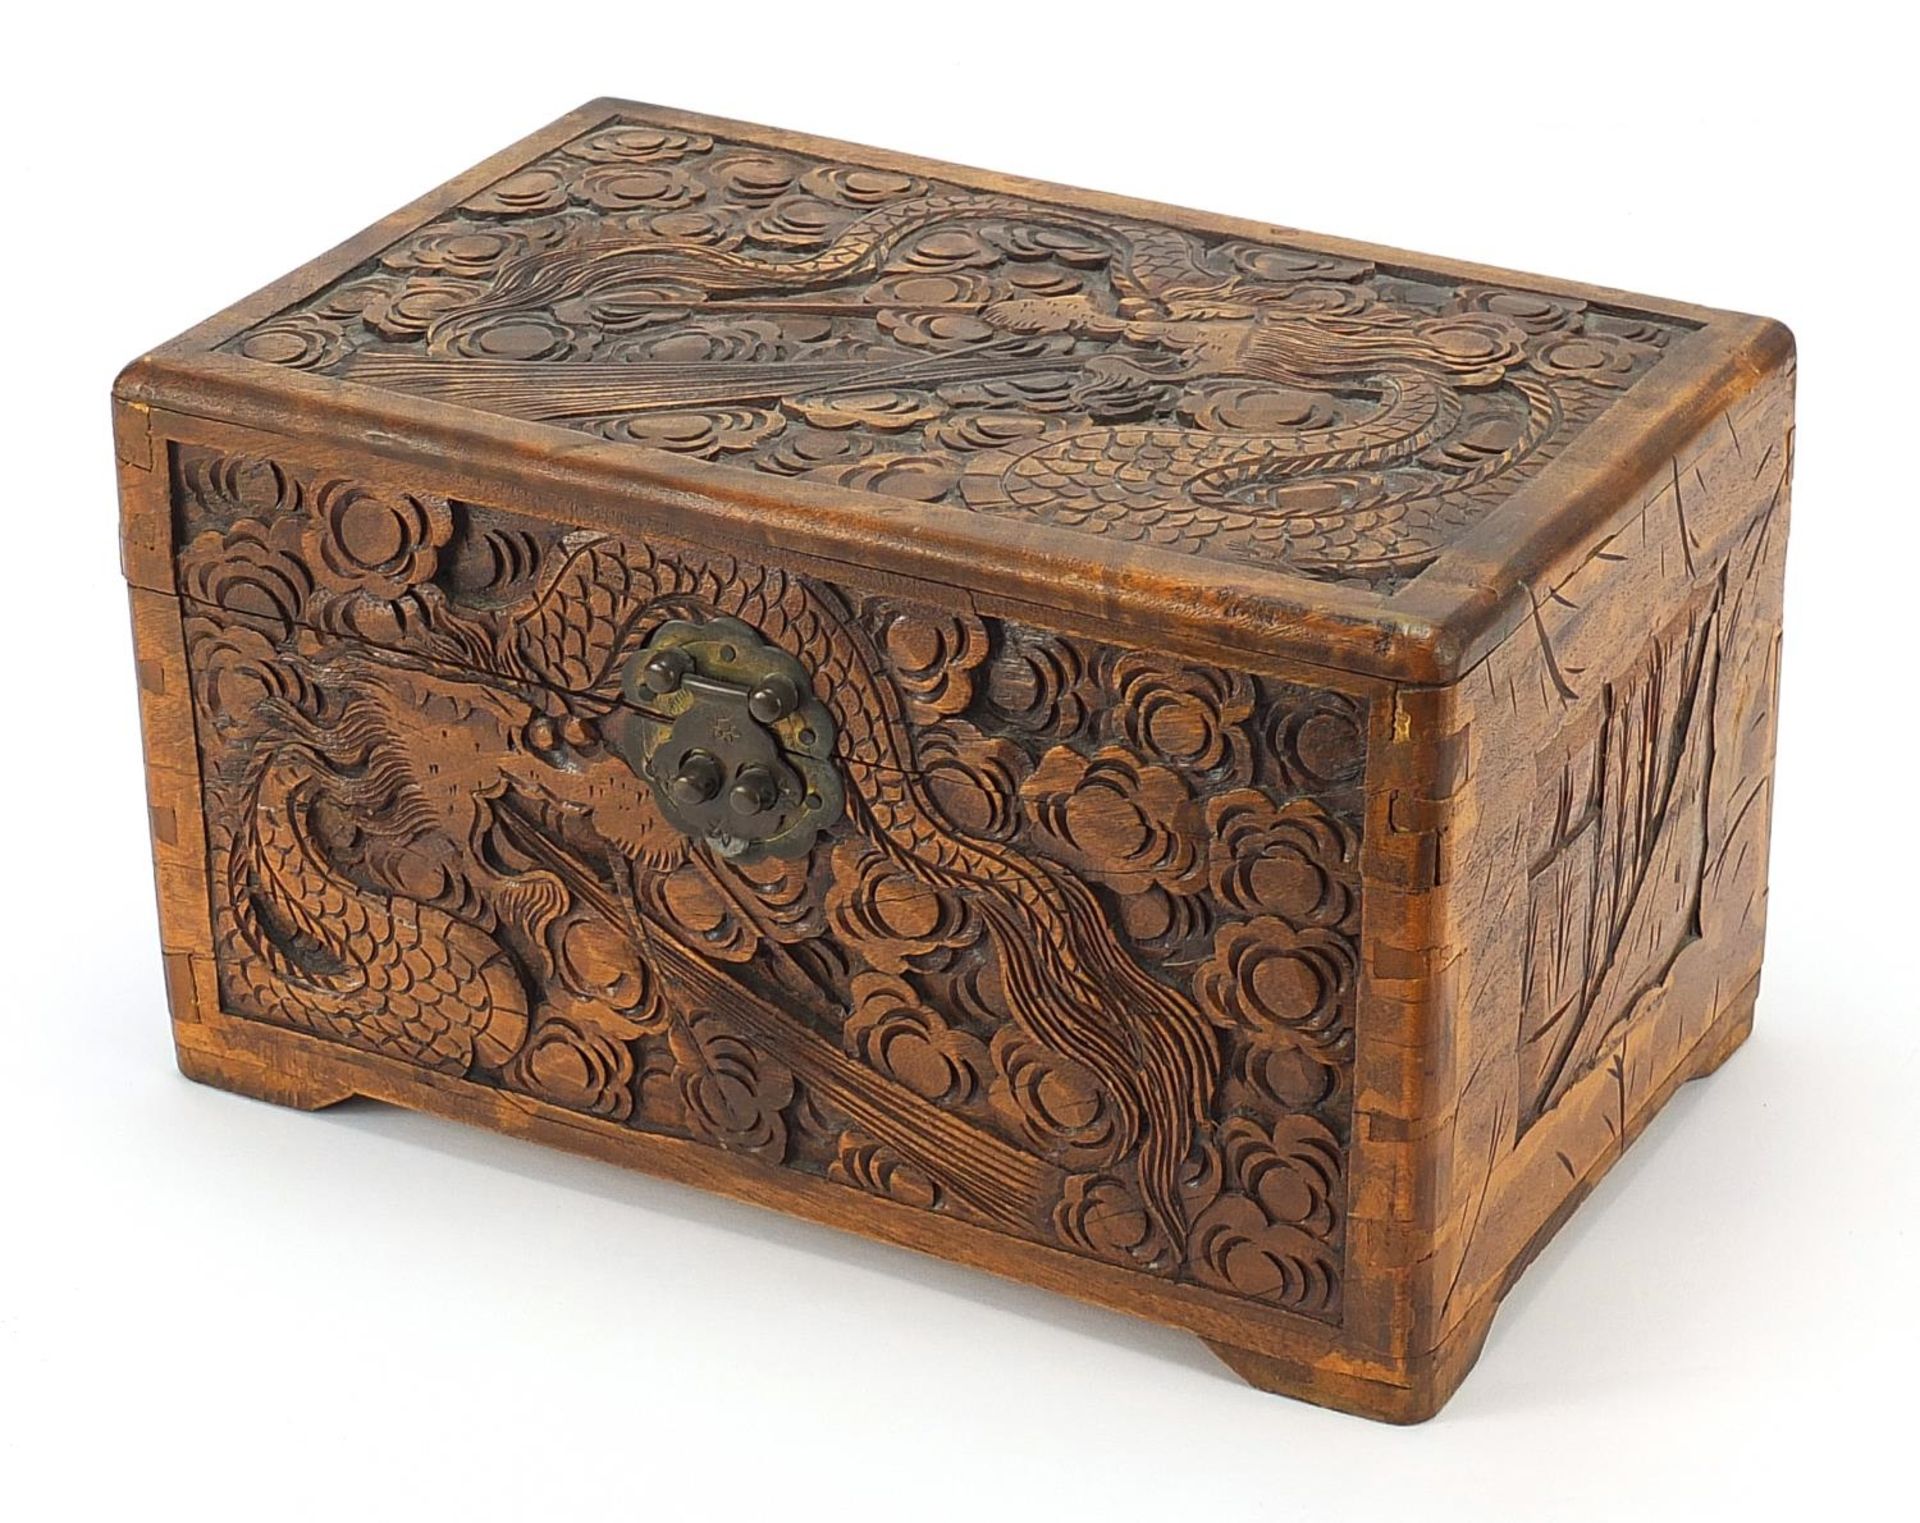 Chinese camphor wood table top chest carved with dragons amongst clouds, 17cm H x 30cm W x 19cm D